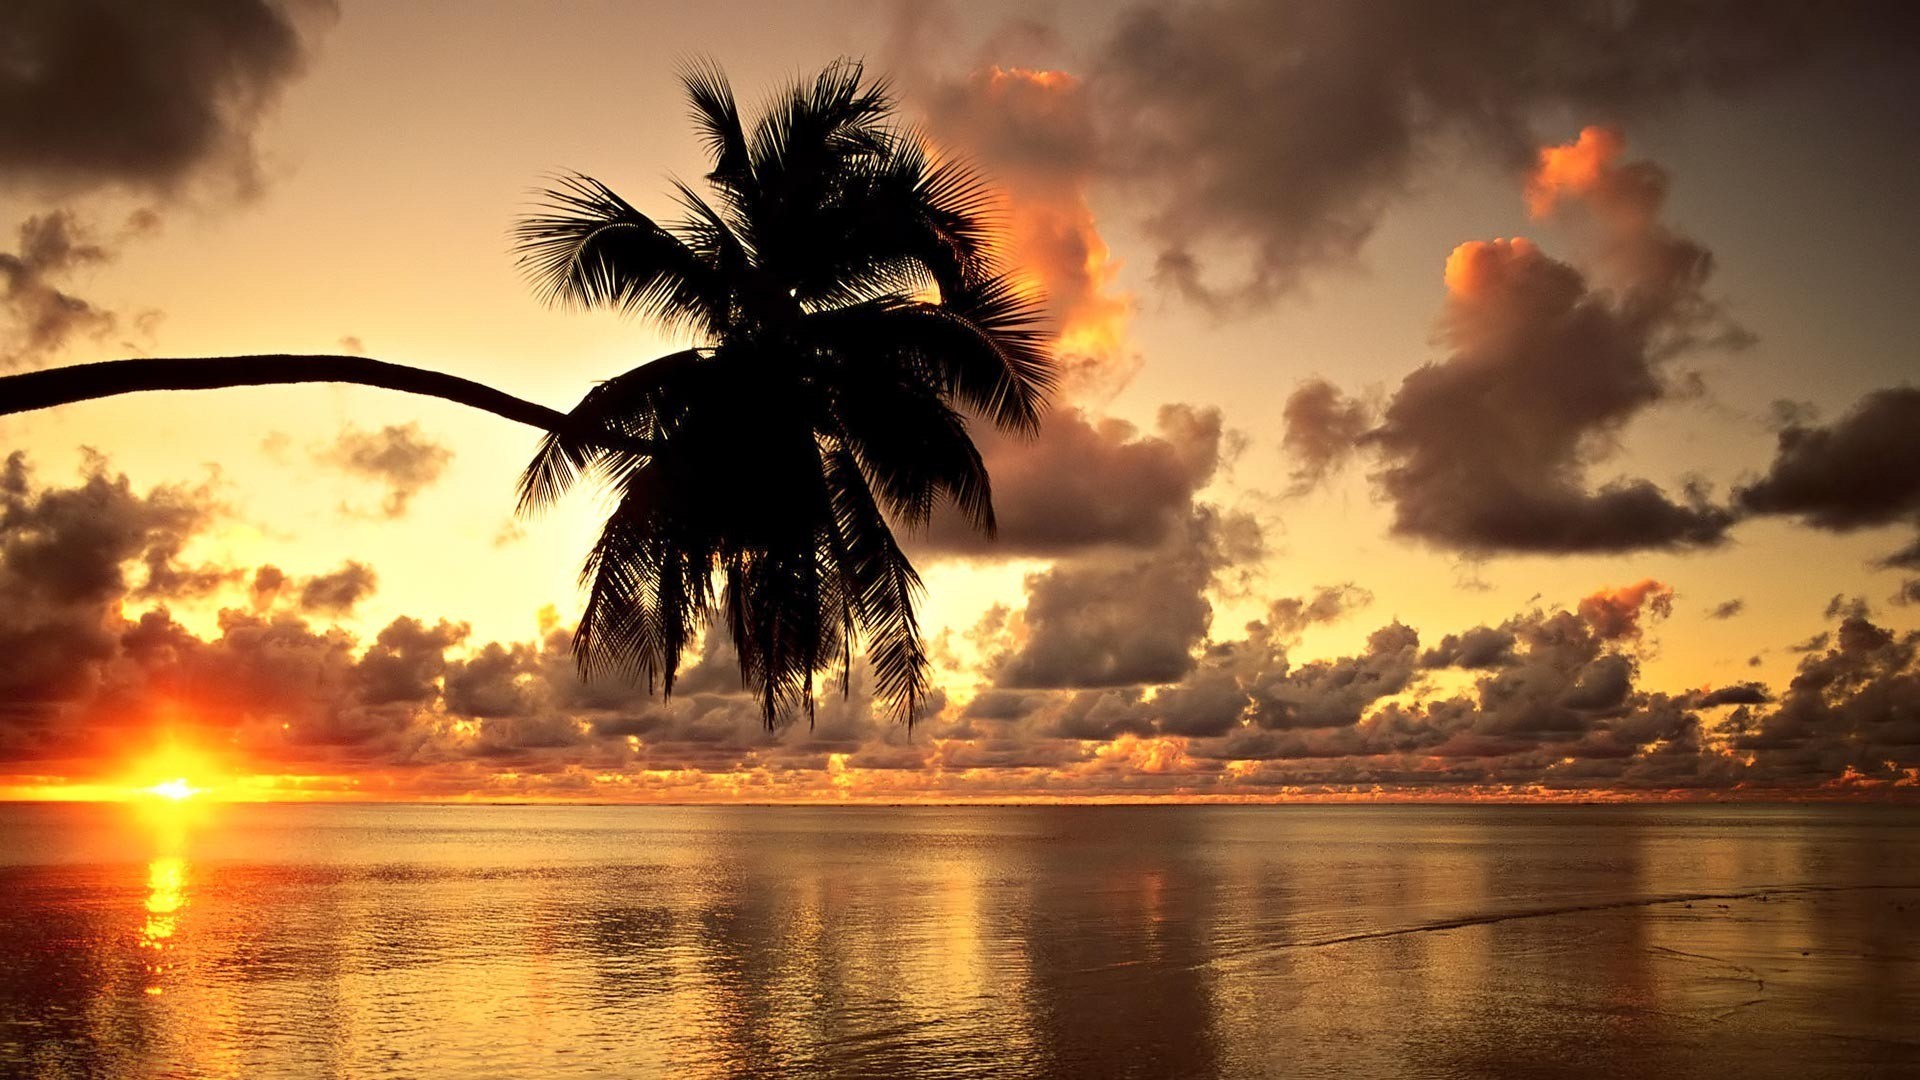 HD Beach Wallpapers 1080P Home Posts tagged Hawaiian Sunset HD Beach Wallpapers 1080p